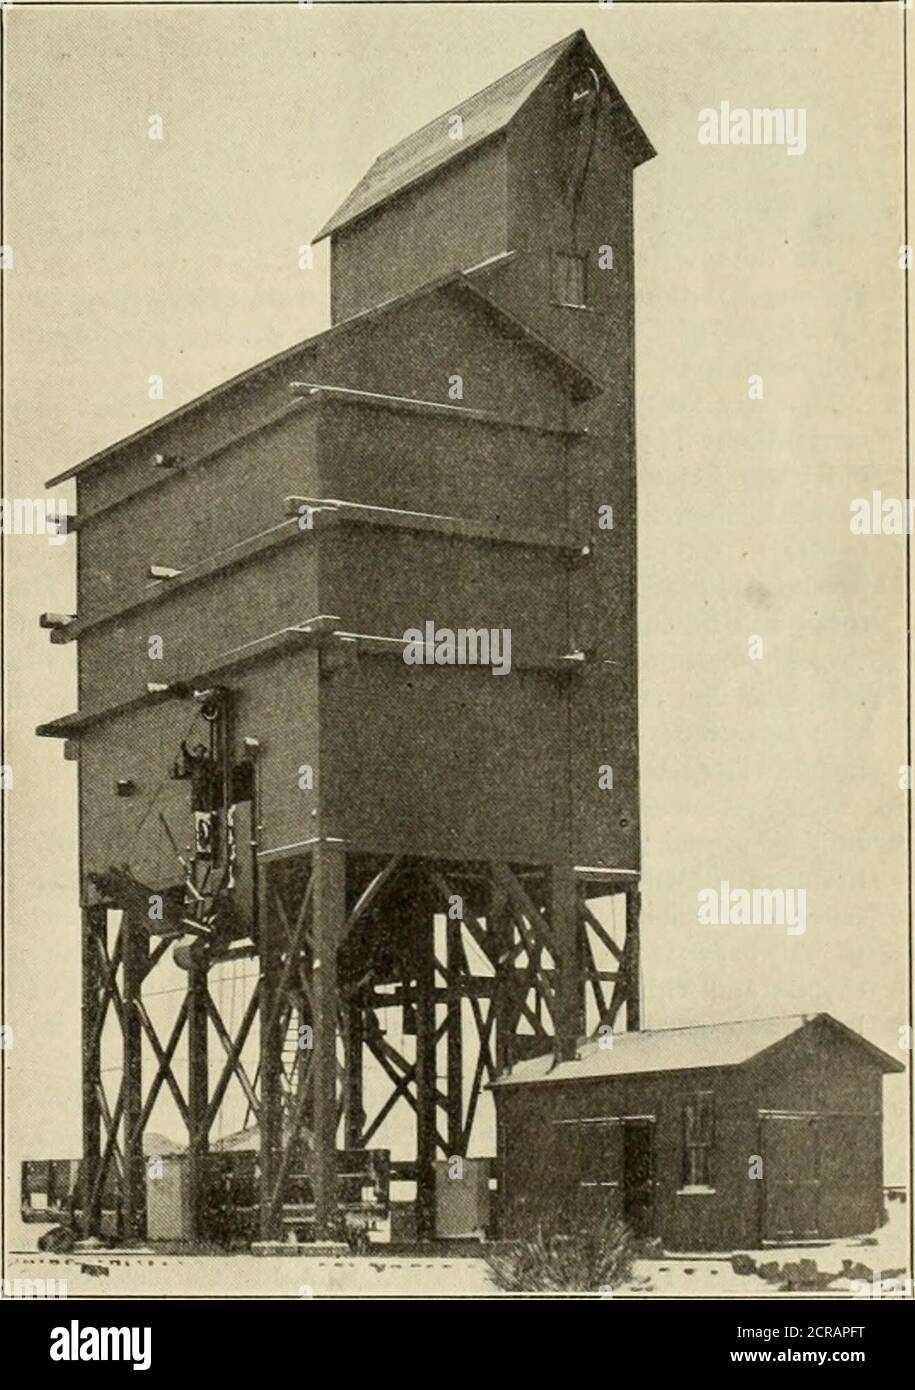 . American engineer and railroad journal . 300 TON COALING STATION ERECTED BY FAIRBANKS, MORSE fit CO., ATAUGUSTA, KAN. THIS STATION IS TYPICAL OF THE LARGE NUMBERERECTED BY THIS COMPANY FOR THE SANTA FE AND IS PROVIDED WITHlO-TON AUXILIARY SCALE POCKETS, WHICH PERMIT THE ACCtn!ATEWEIGHING OF THE COAL PUT ON EACH LOCOMOTIVE TENDER. THISSTATION COALS FOUR TR.CKS AND OTHERS OF THE SAME TYPE WITH-OUT THE BRIDGE COAL TWO TRACKS. COALING STATION ERECTED AT BECKER, N. M., BY THE ROBERTS &SCHAEFER CO. THIS PLANT IS TYPICAL OF FOUR PLANTS CONSTRUCT-ED ON THE EASTERN RAILWAY OF MEXICO AND USES THE HOL Stock Photo